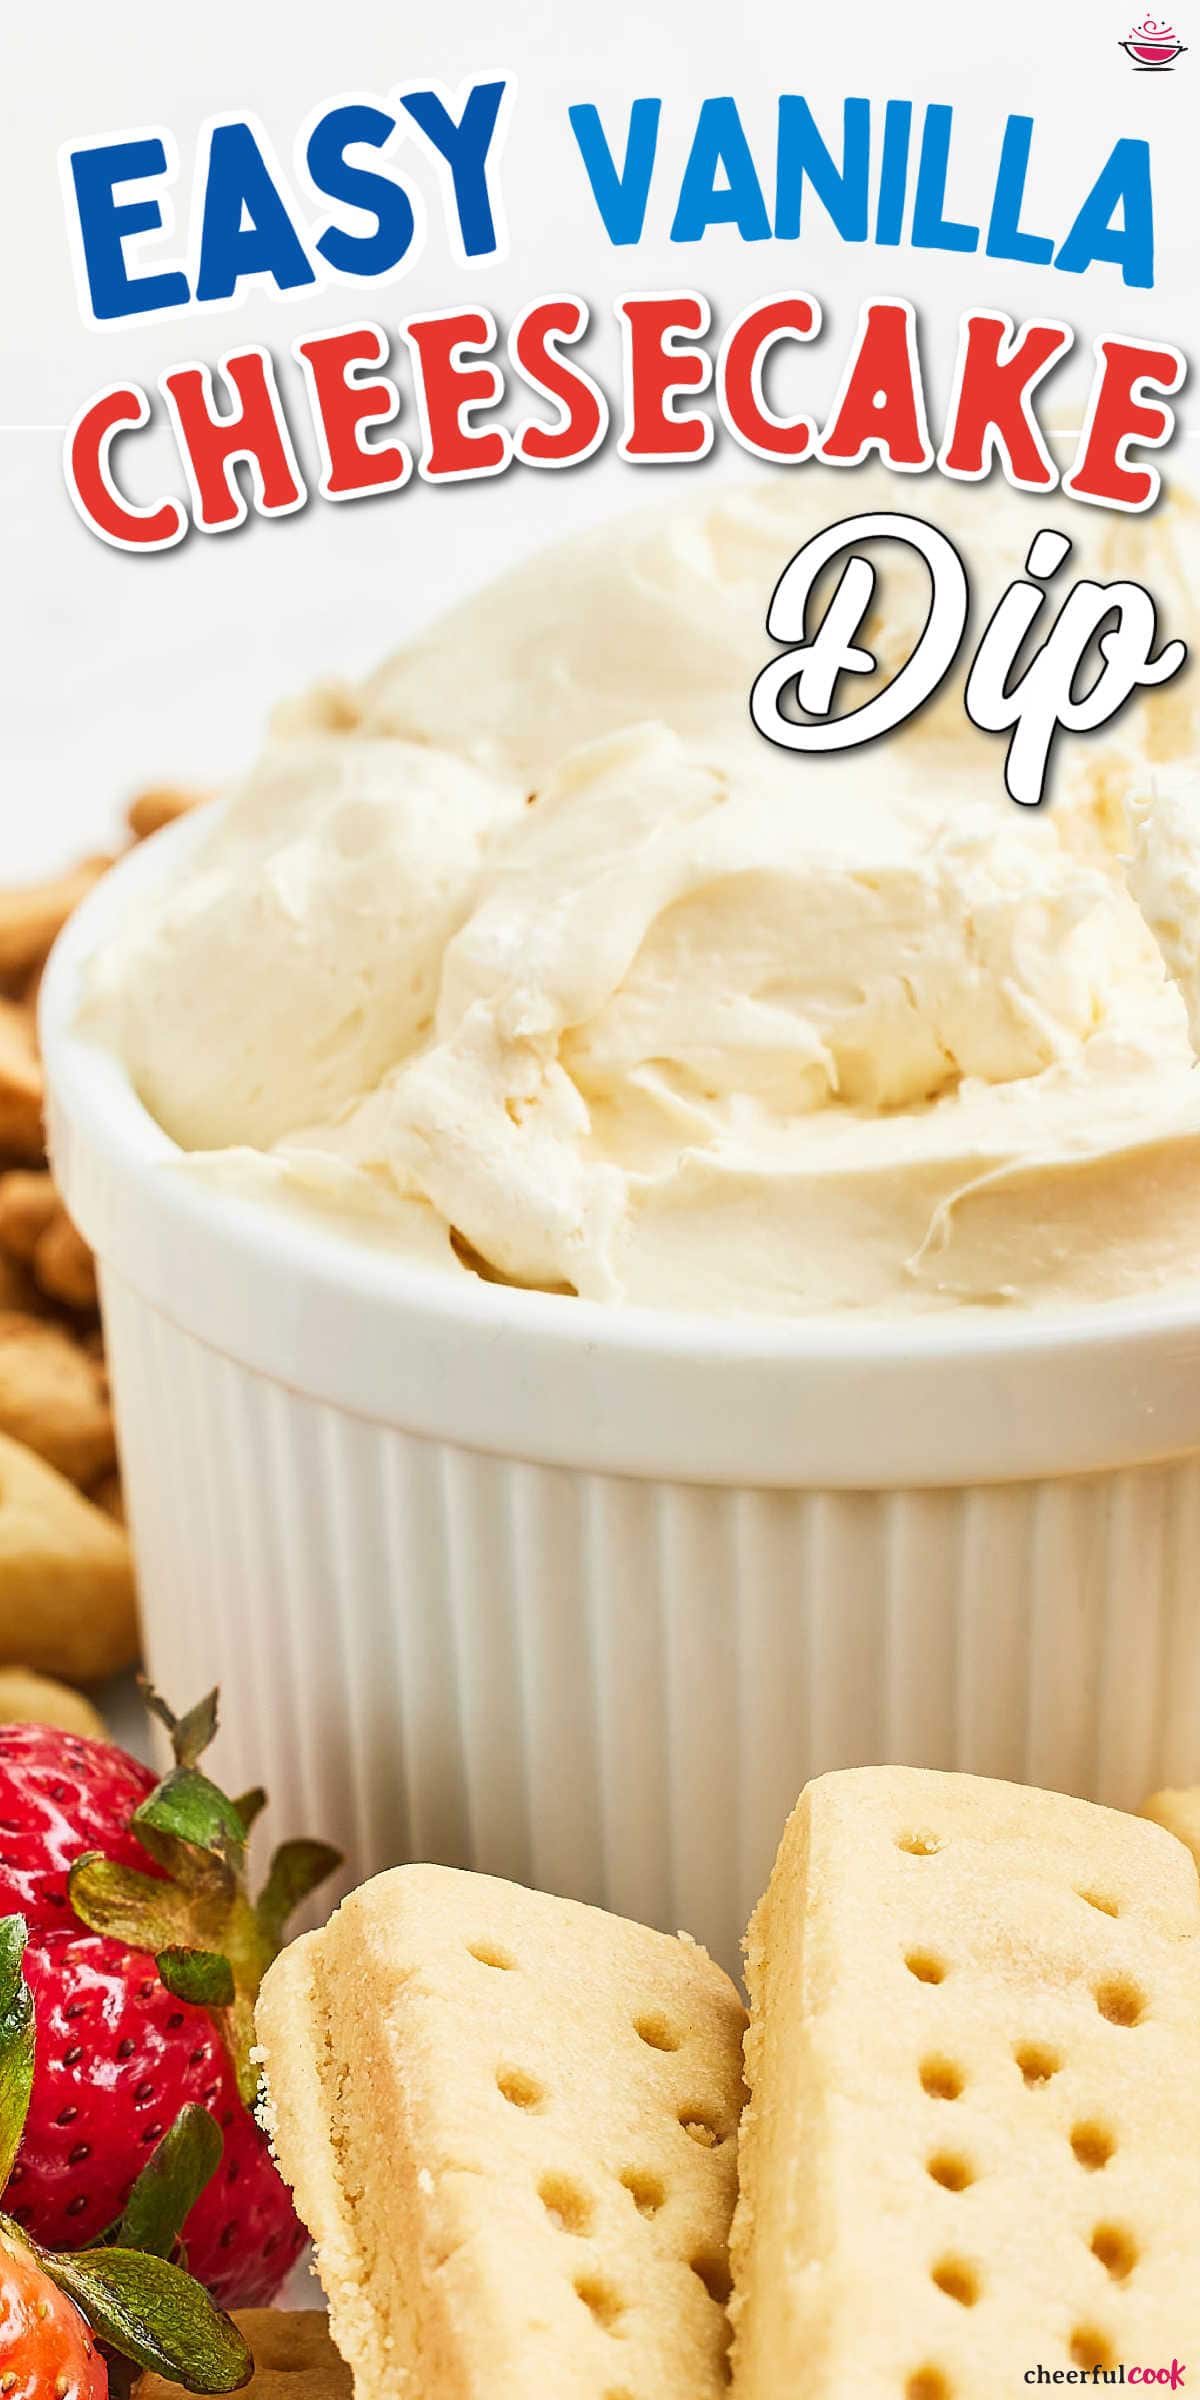 Discover this easy, creamy Cheesecake Dip recipe for a crowd-pleasing dessert that's perfect for any occasion! Serve with your favorite dippers, and watch it disappear in no time! #cheerfulcook #CheesecakeDip #EasyDessert #PartyFood #DessertDip #nobakedessert via @cheerfulcook